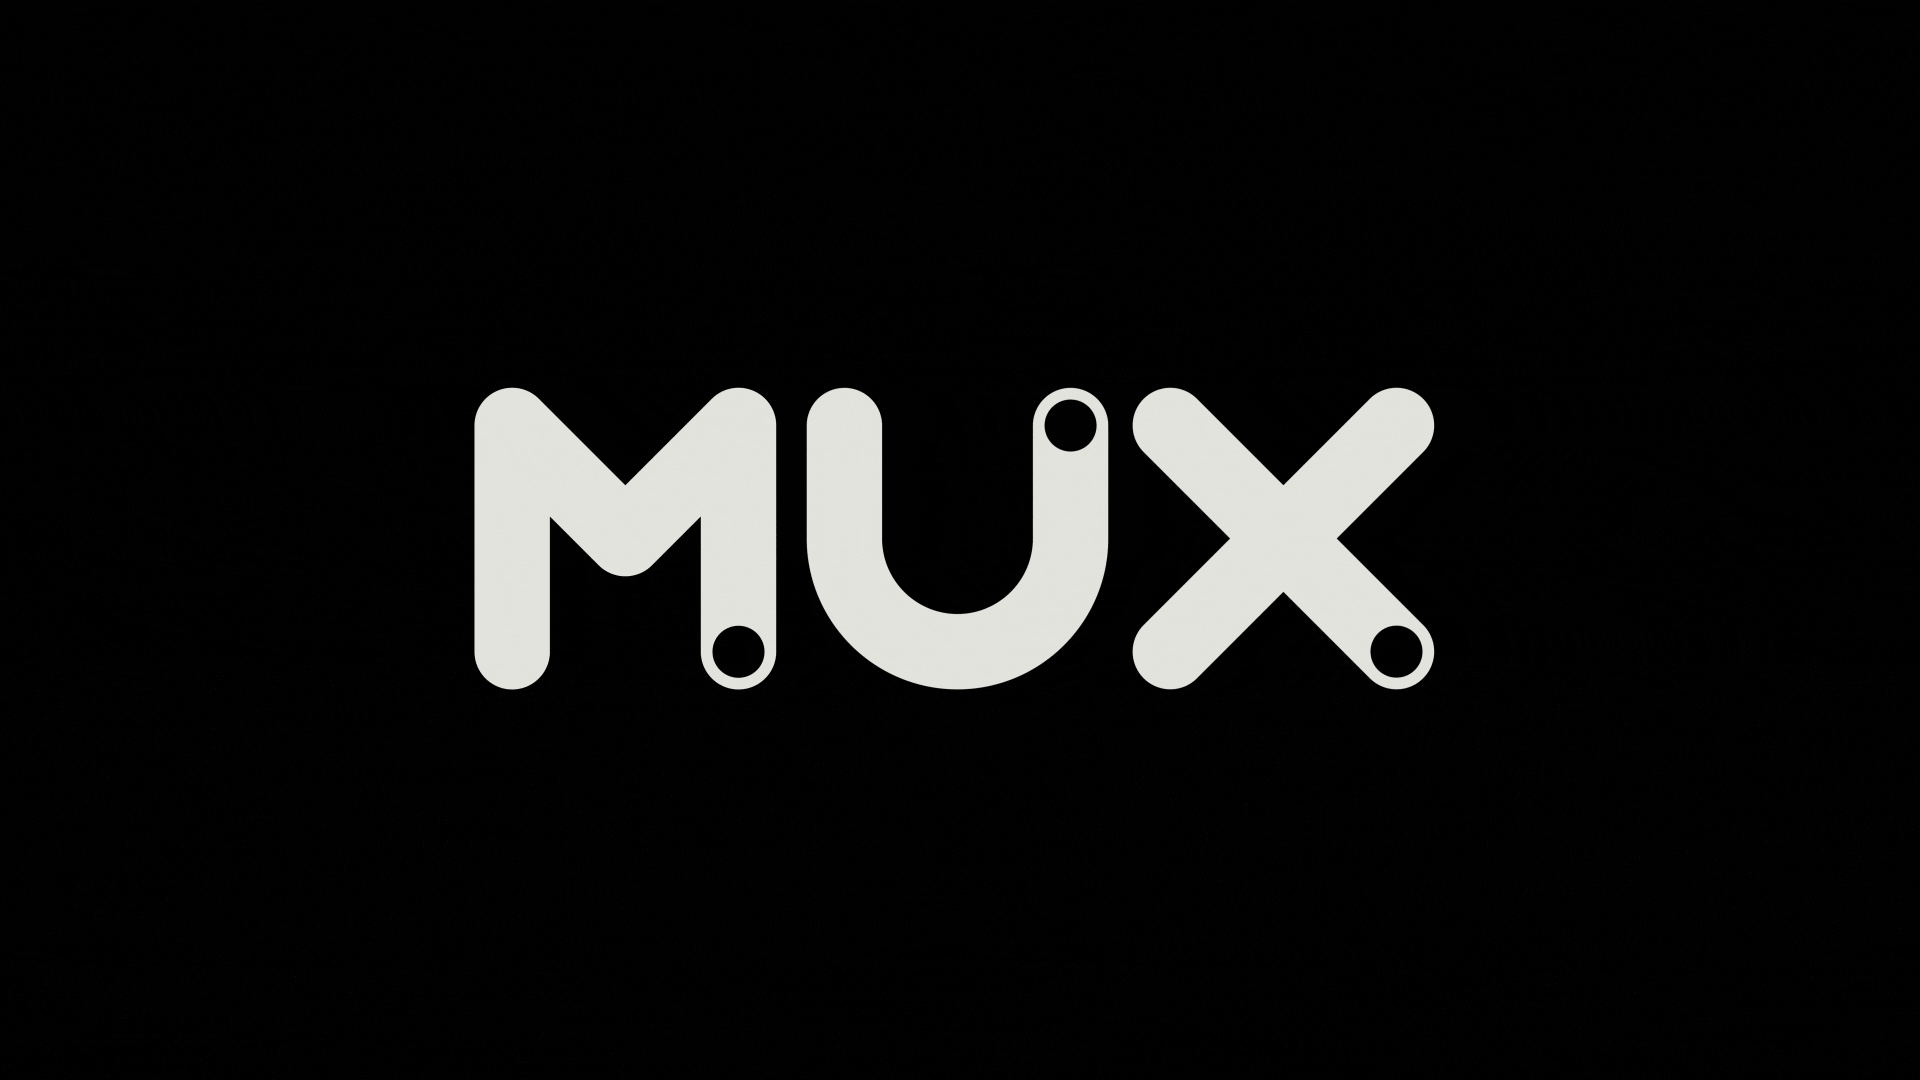 An animation showing the Mux logo letters flipping upwards on the Y axis in a loop